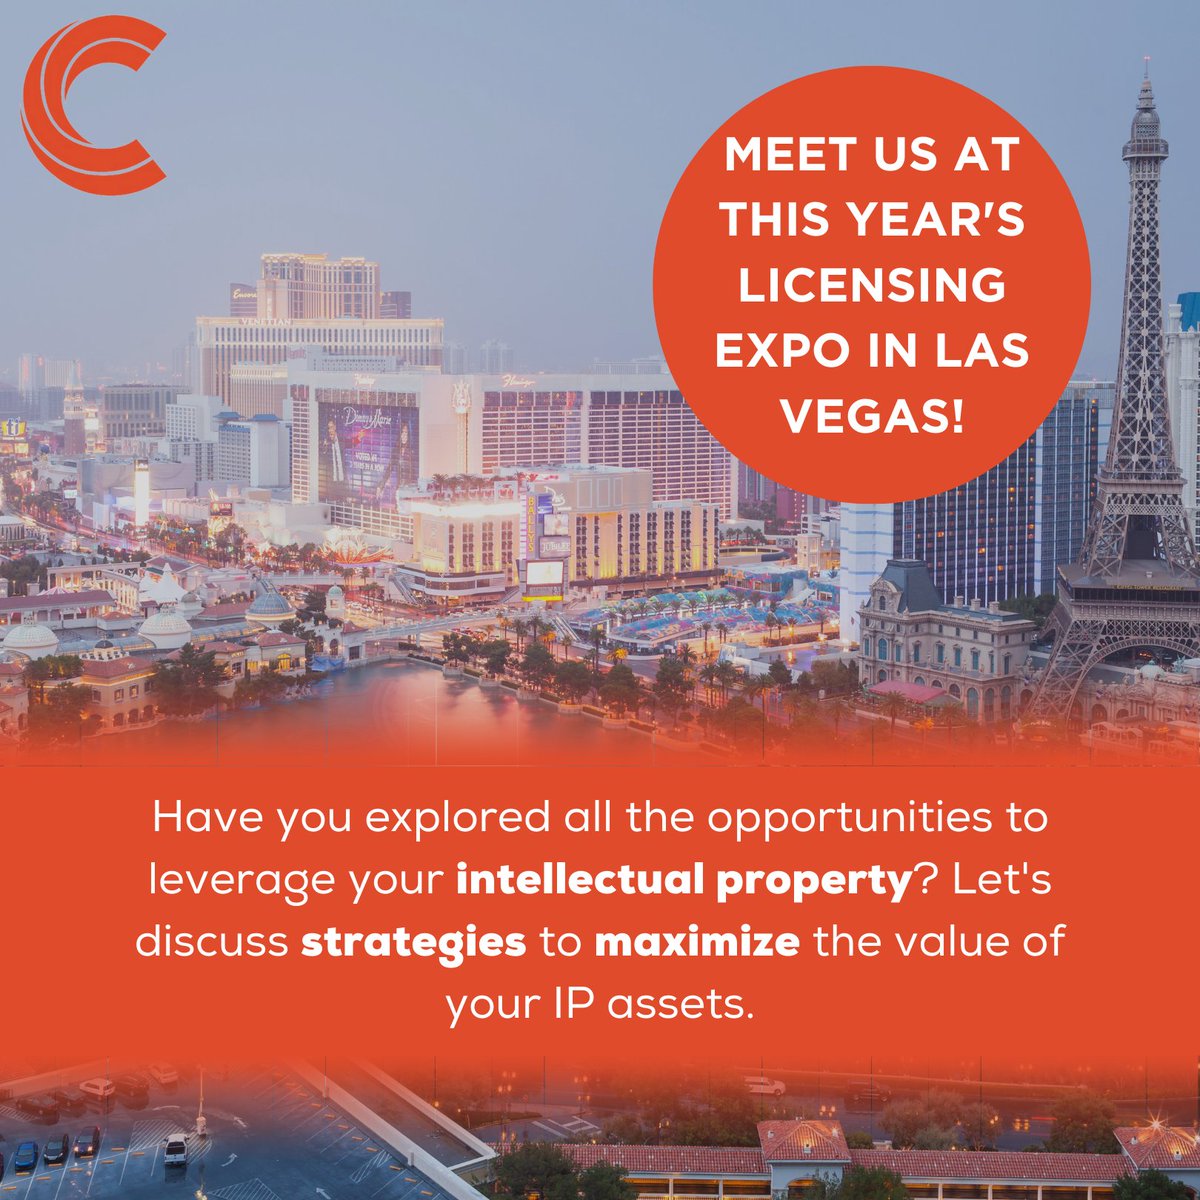 Have you explored all the opportunities to leverage your intellectual property? Let's discuss strategies to maximize the value of your IP assets. Meet us at this year's Licensing Expo in Las Vegas!

#LicensingExpo2024 #BrandProtection #IPStrategy